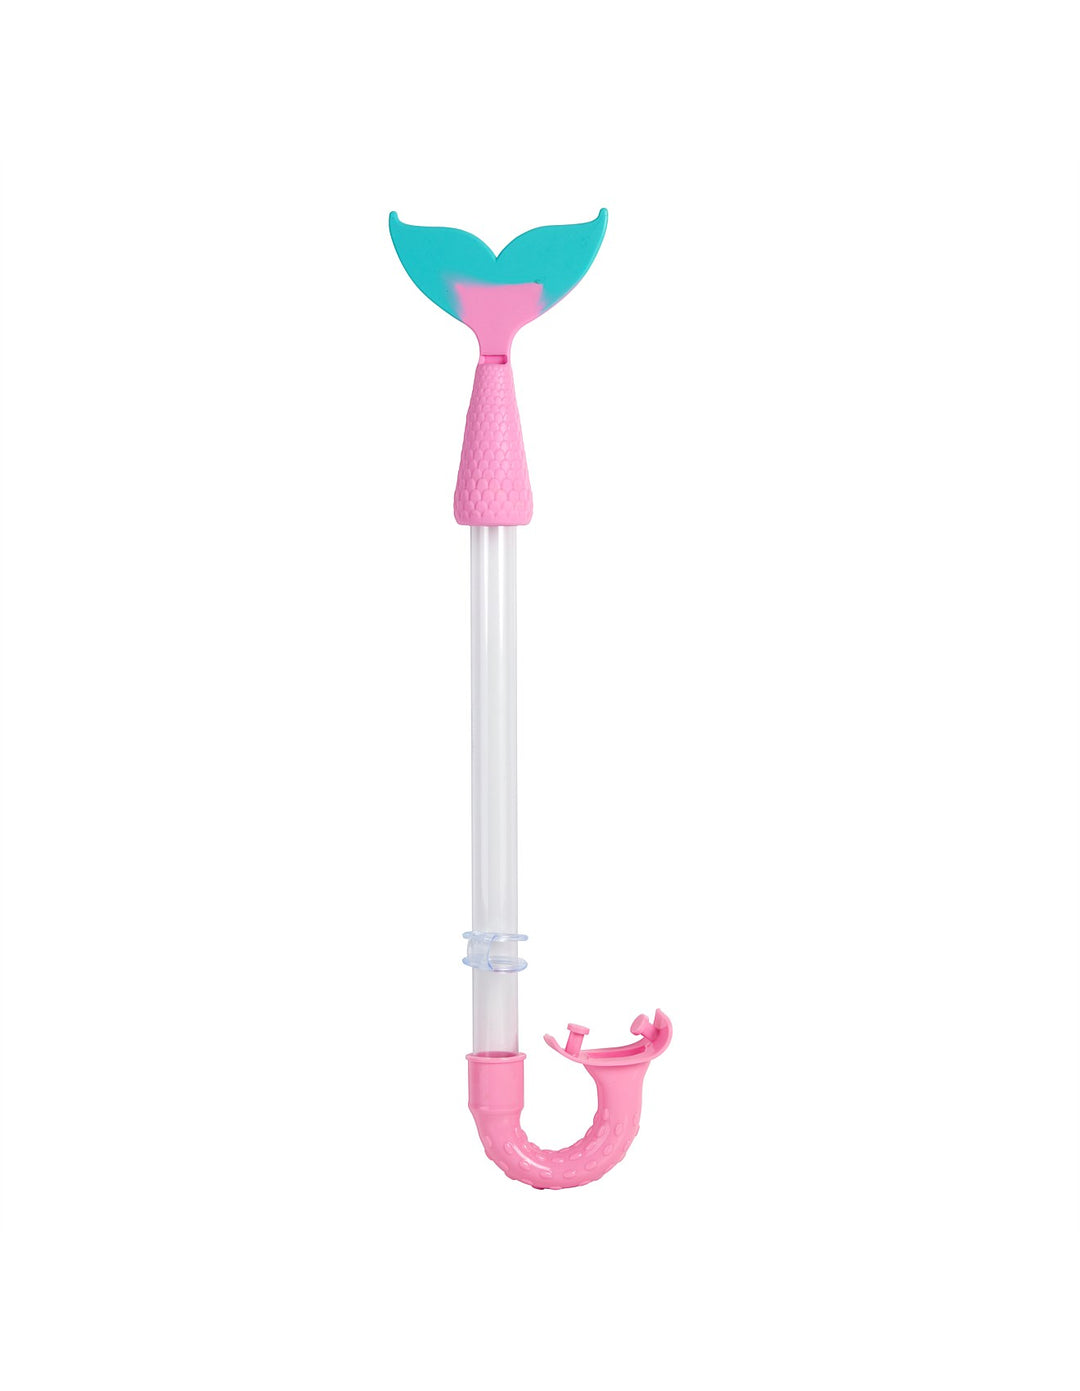 ARIETAIL Mermaid Tail SNORKEL - Mint to be Pink Bling2o